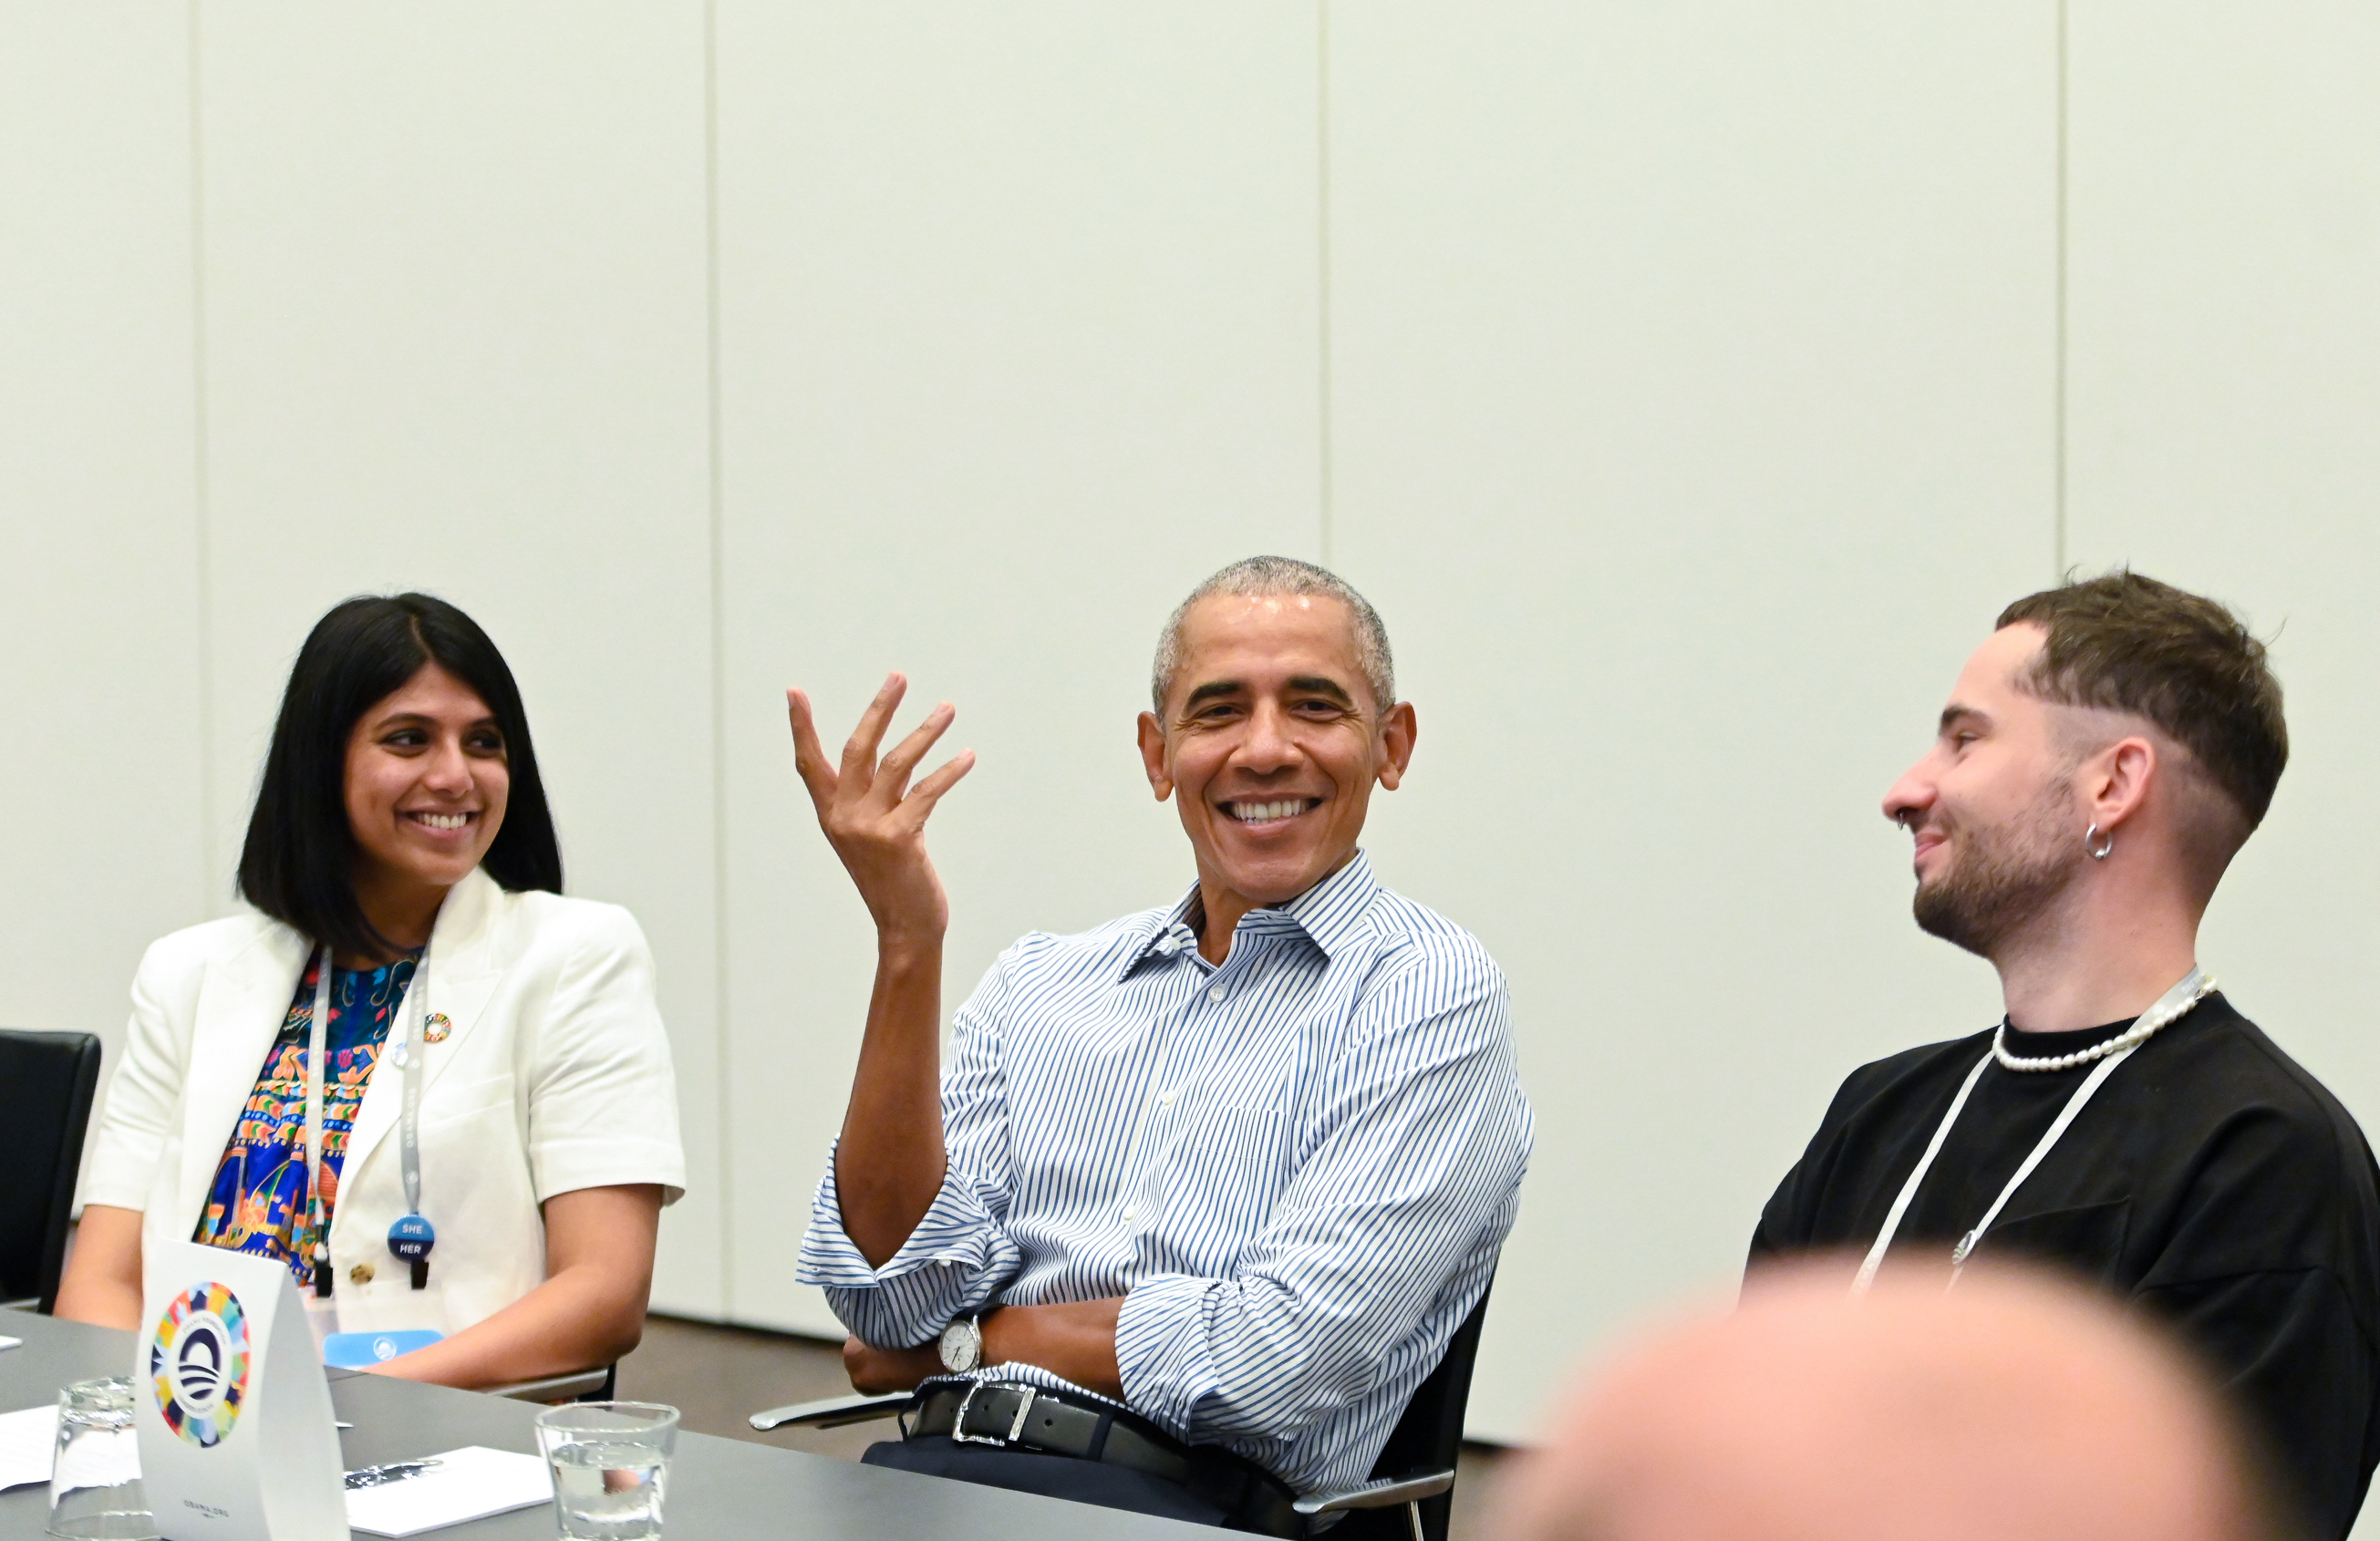 Holmes Group discussion with former president, Obama